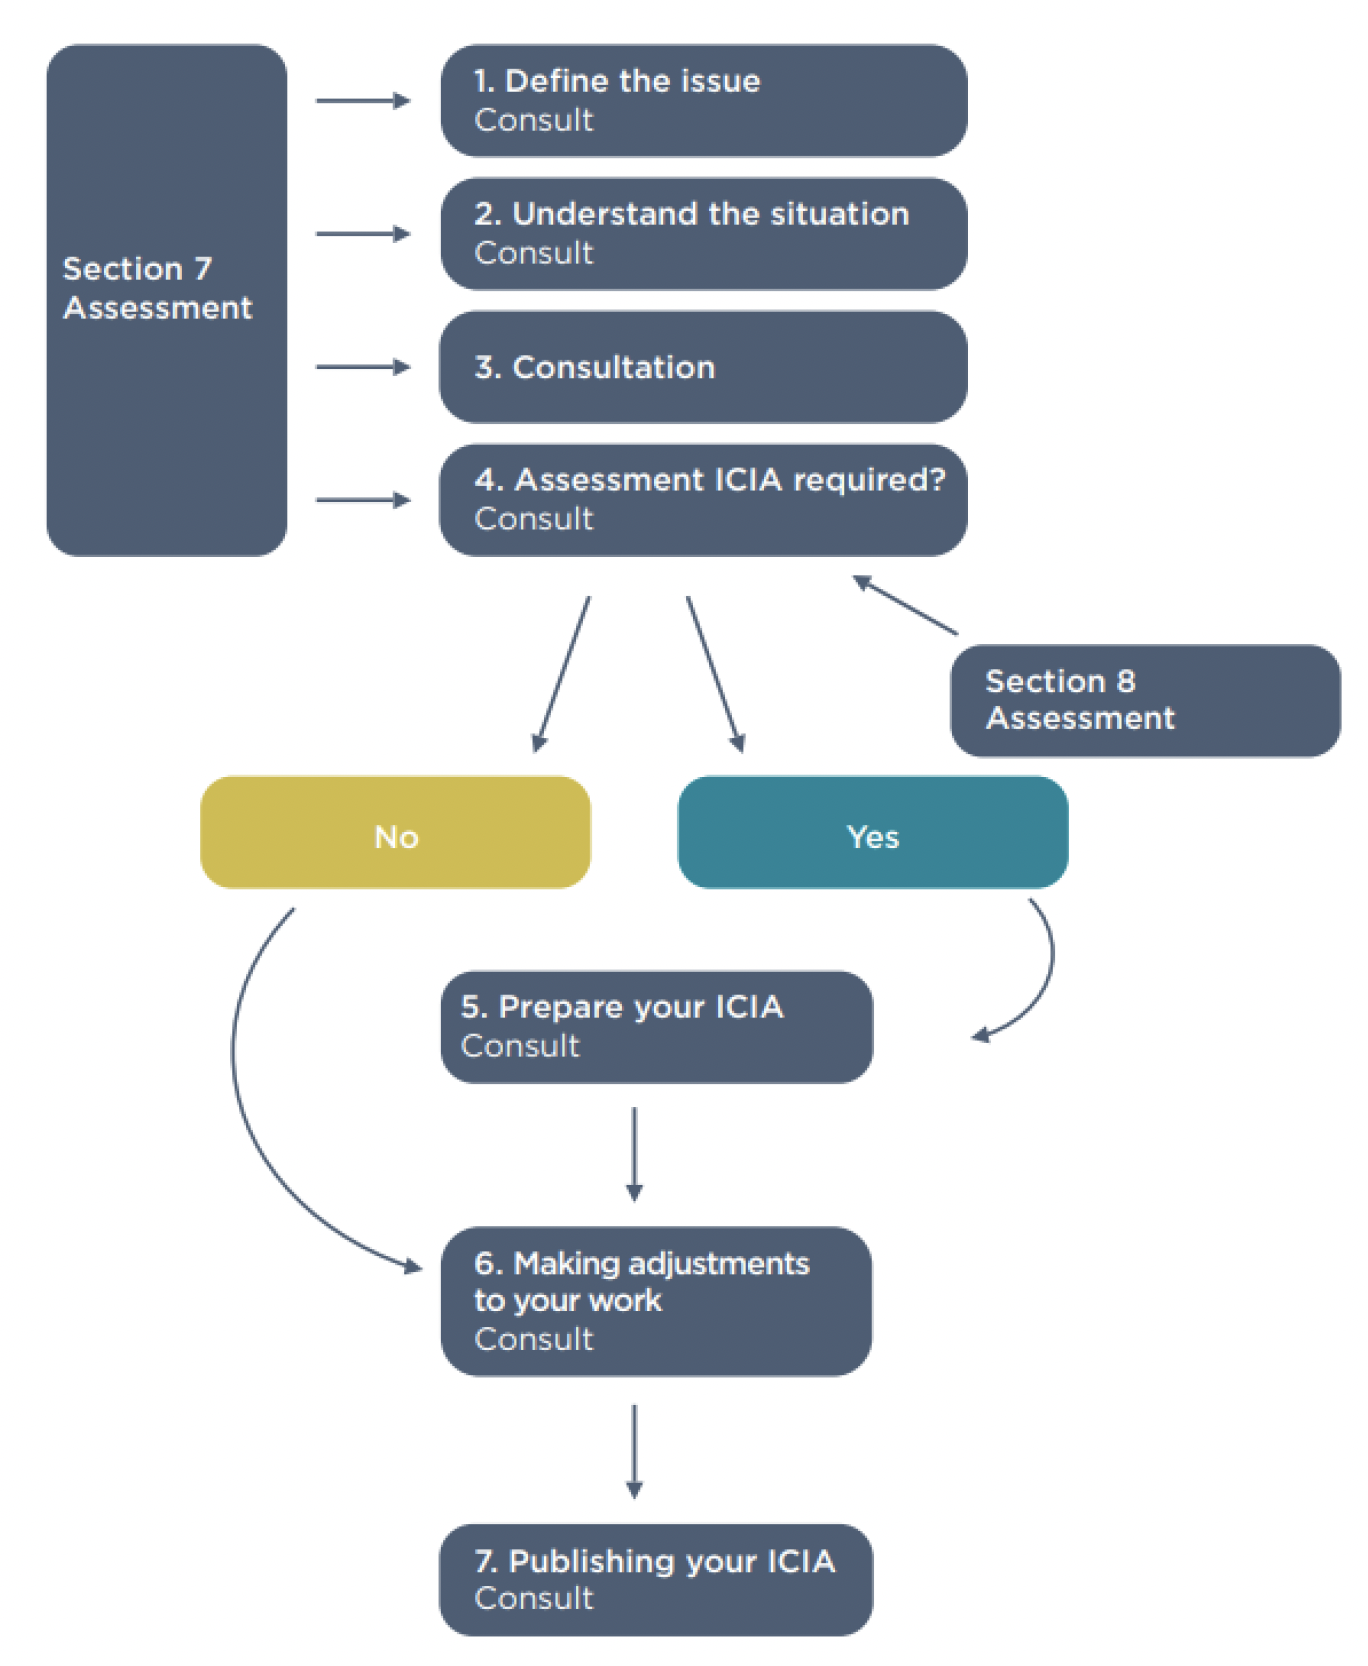 Flowchart defining 7 stages of the ICIA process. Stages 1 to 4 are the screening assessment which will then determine whether a full assessment is required in stages 5 to 7. 